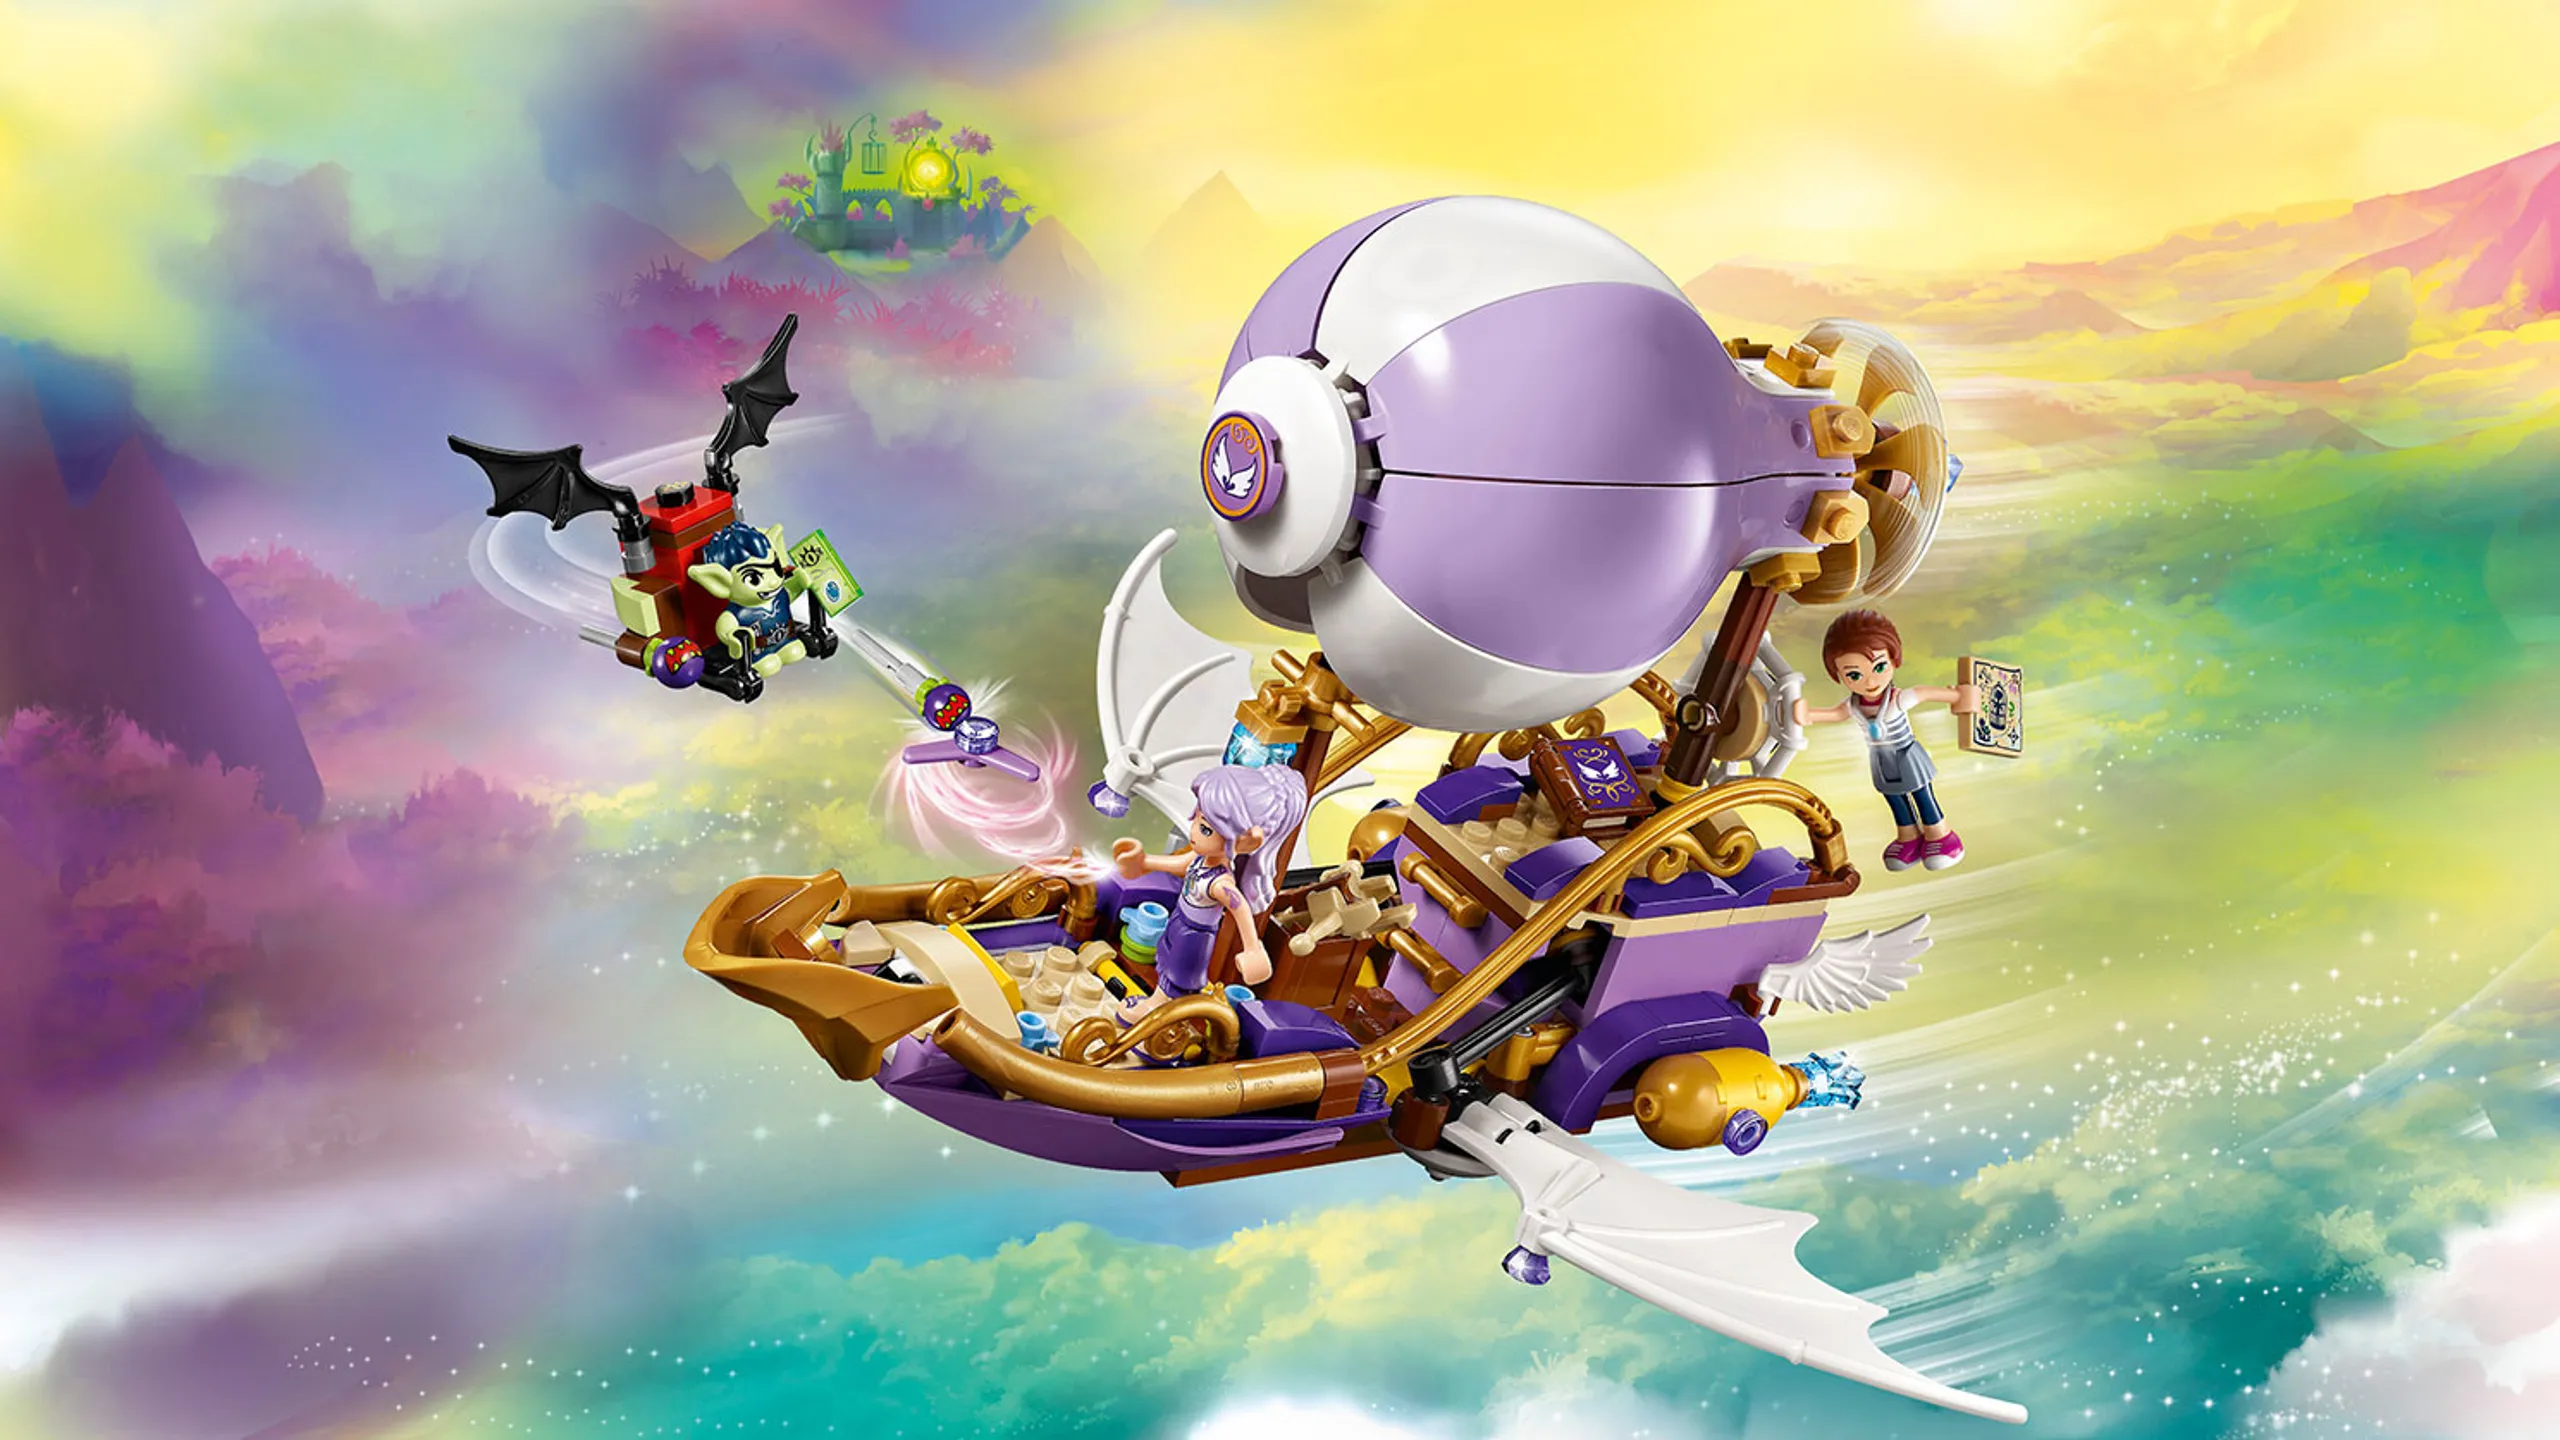 LEGO Elves - 41186 Azari & the Goblin Forest Escape - The Goblin has spotted Emily Jones with her amulet on Aira’s airship and swoops in with the goblin glider to steal the amulet.